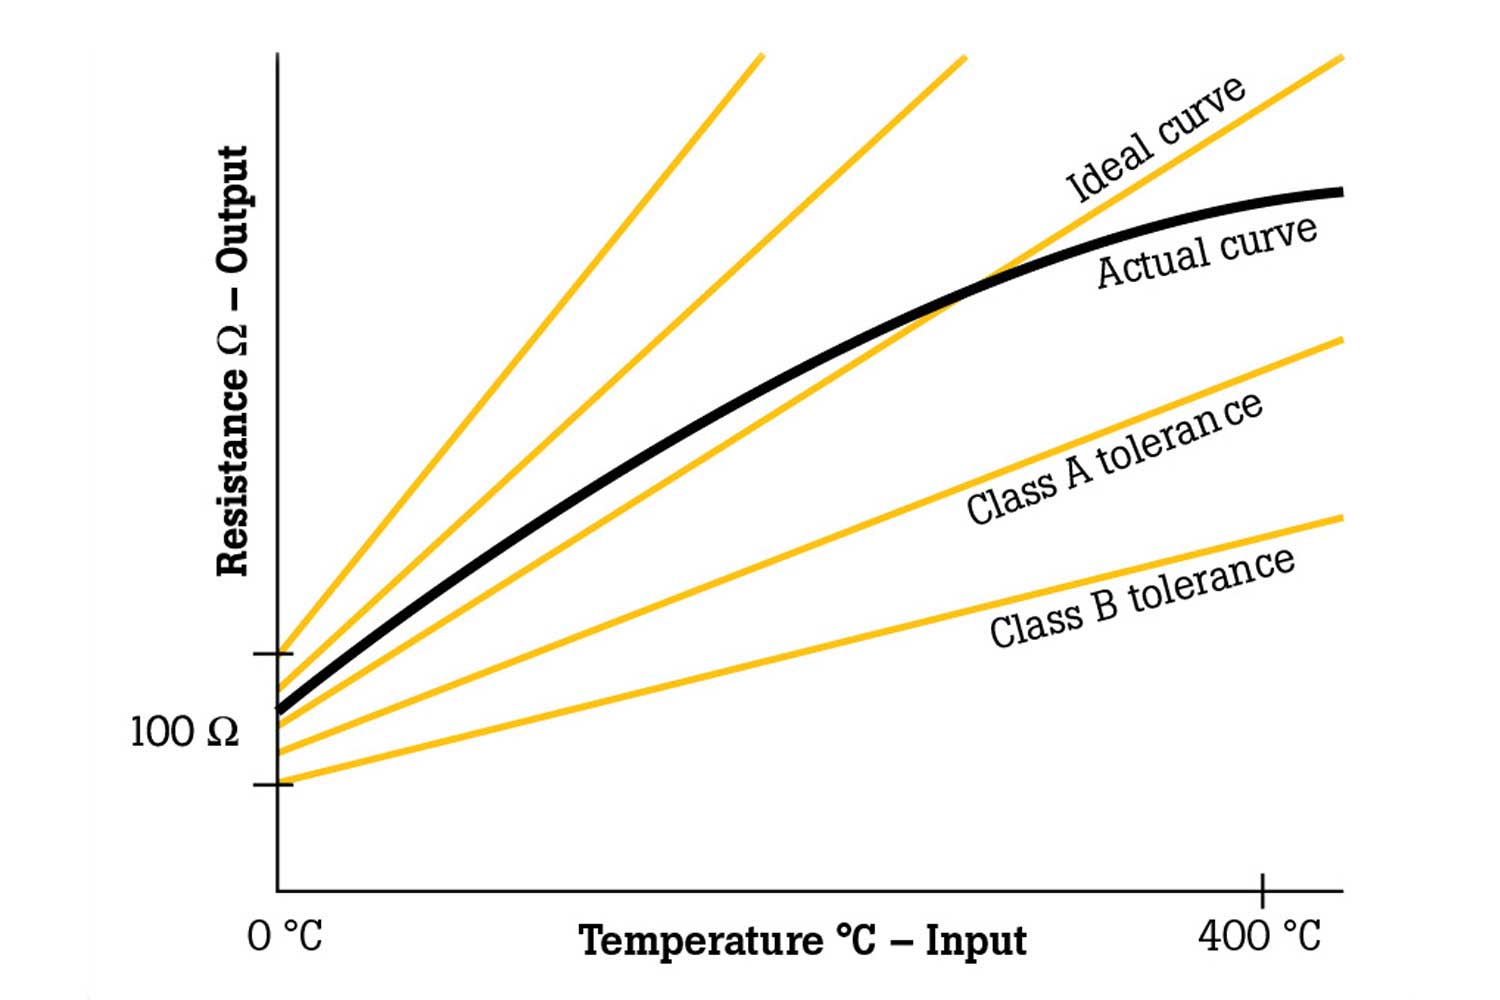 Chart of Resistance to Temperature Curves